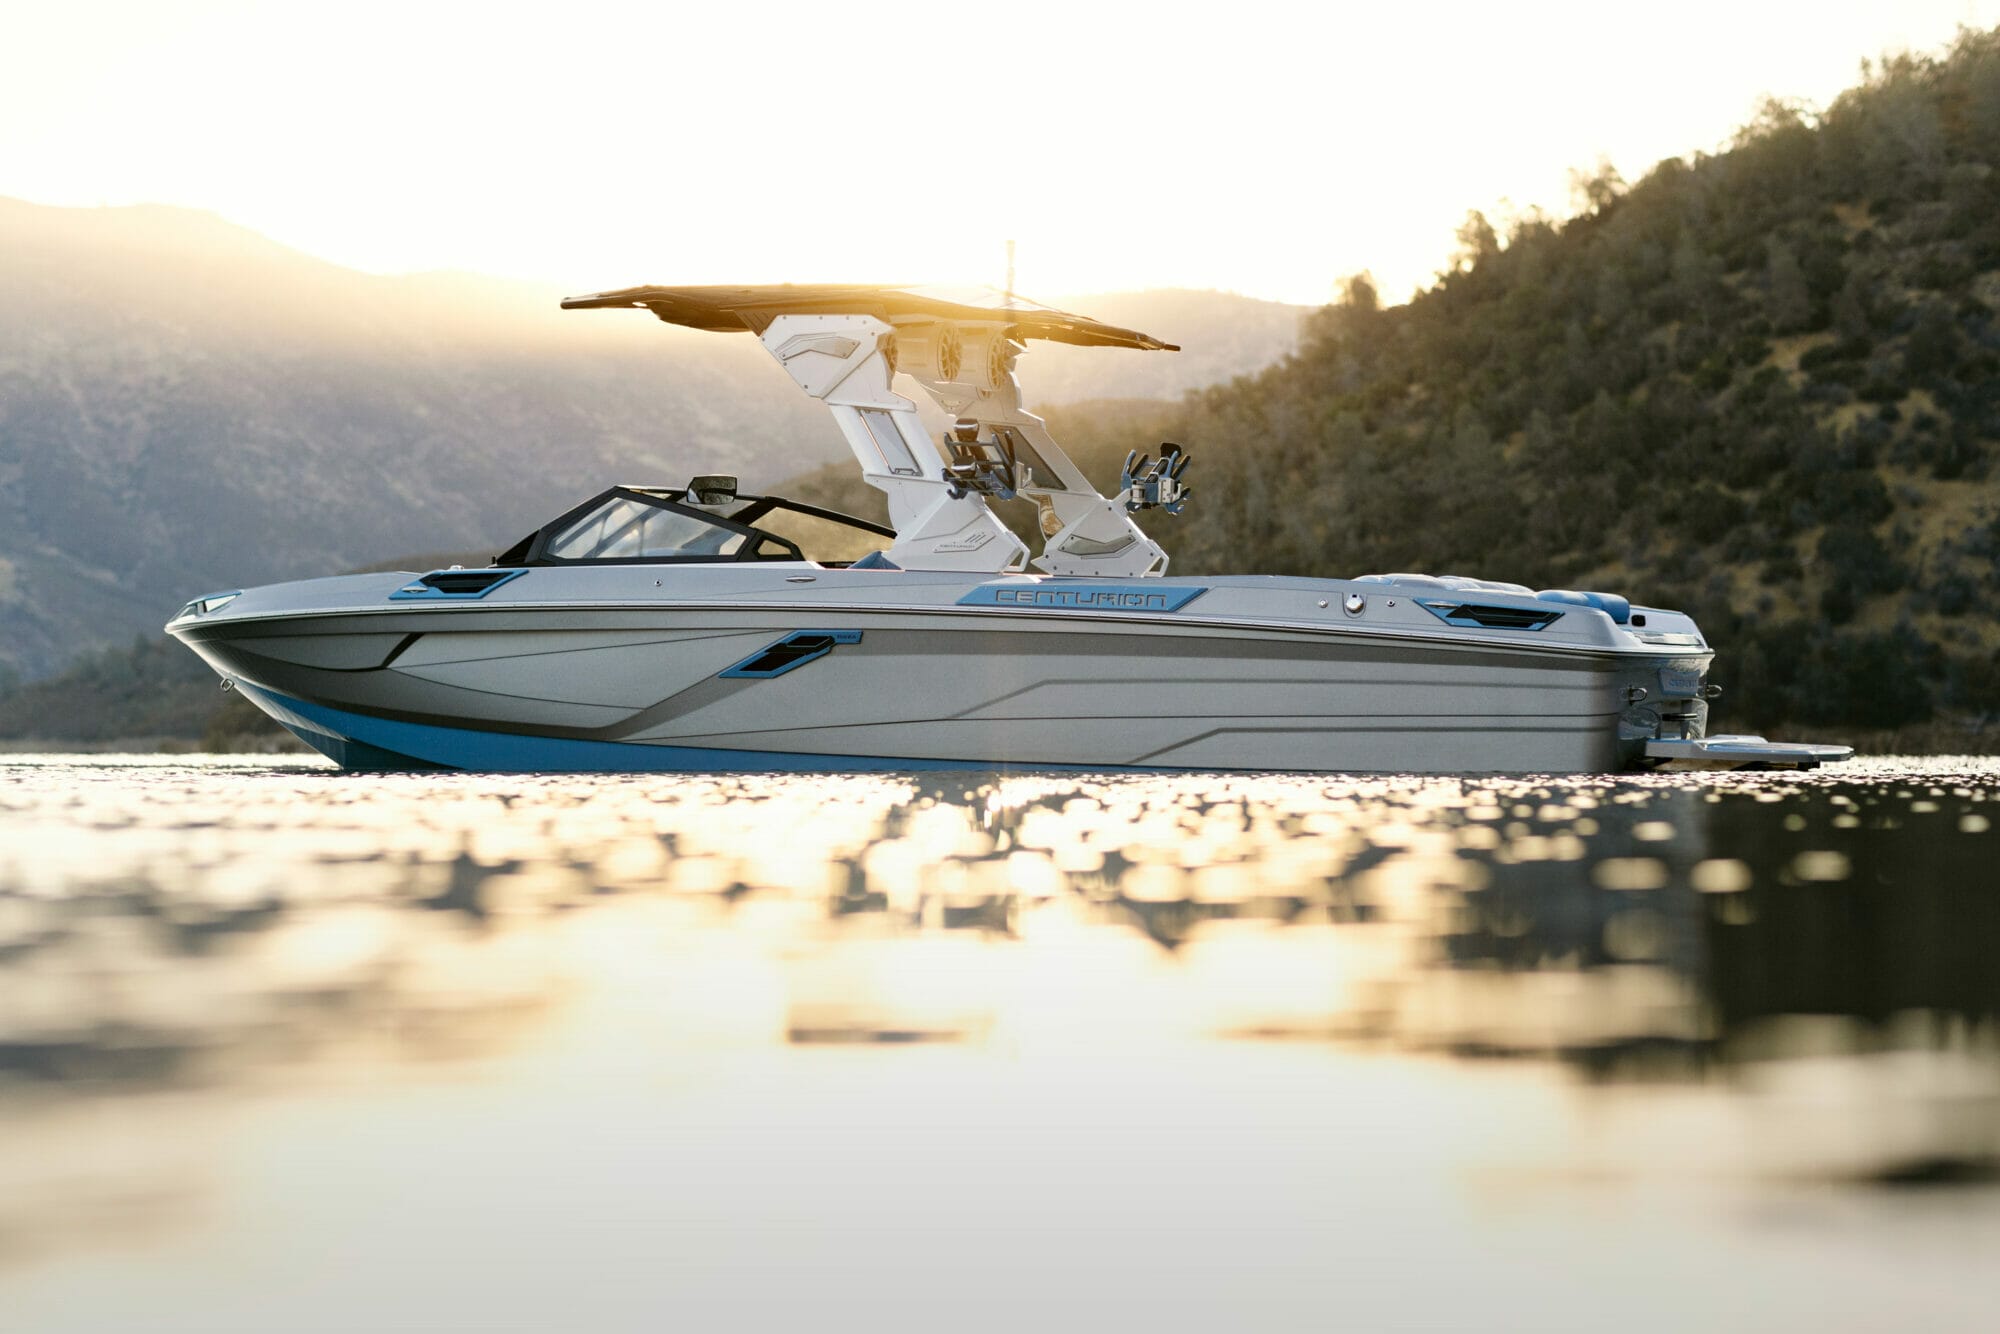 A wakeboat on the water with mountains in the background.